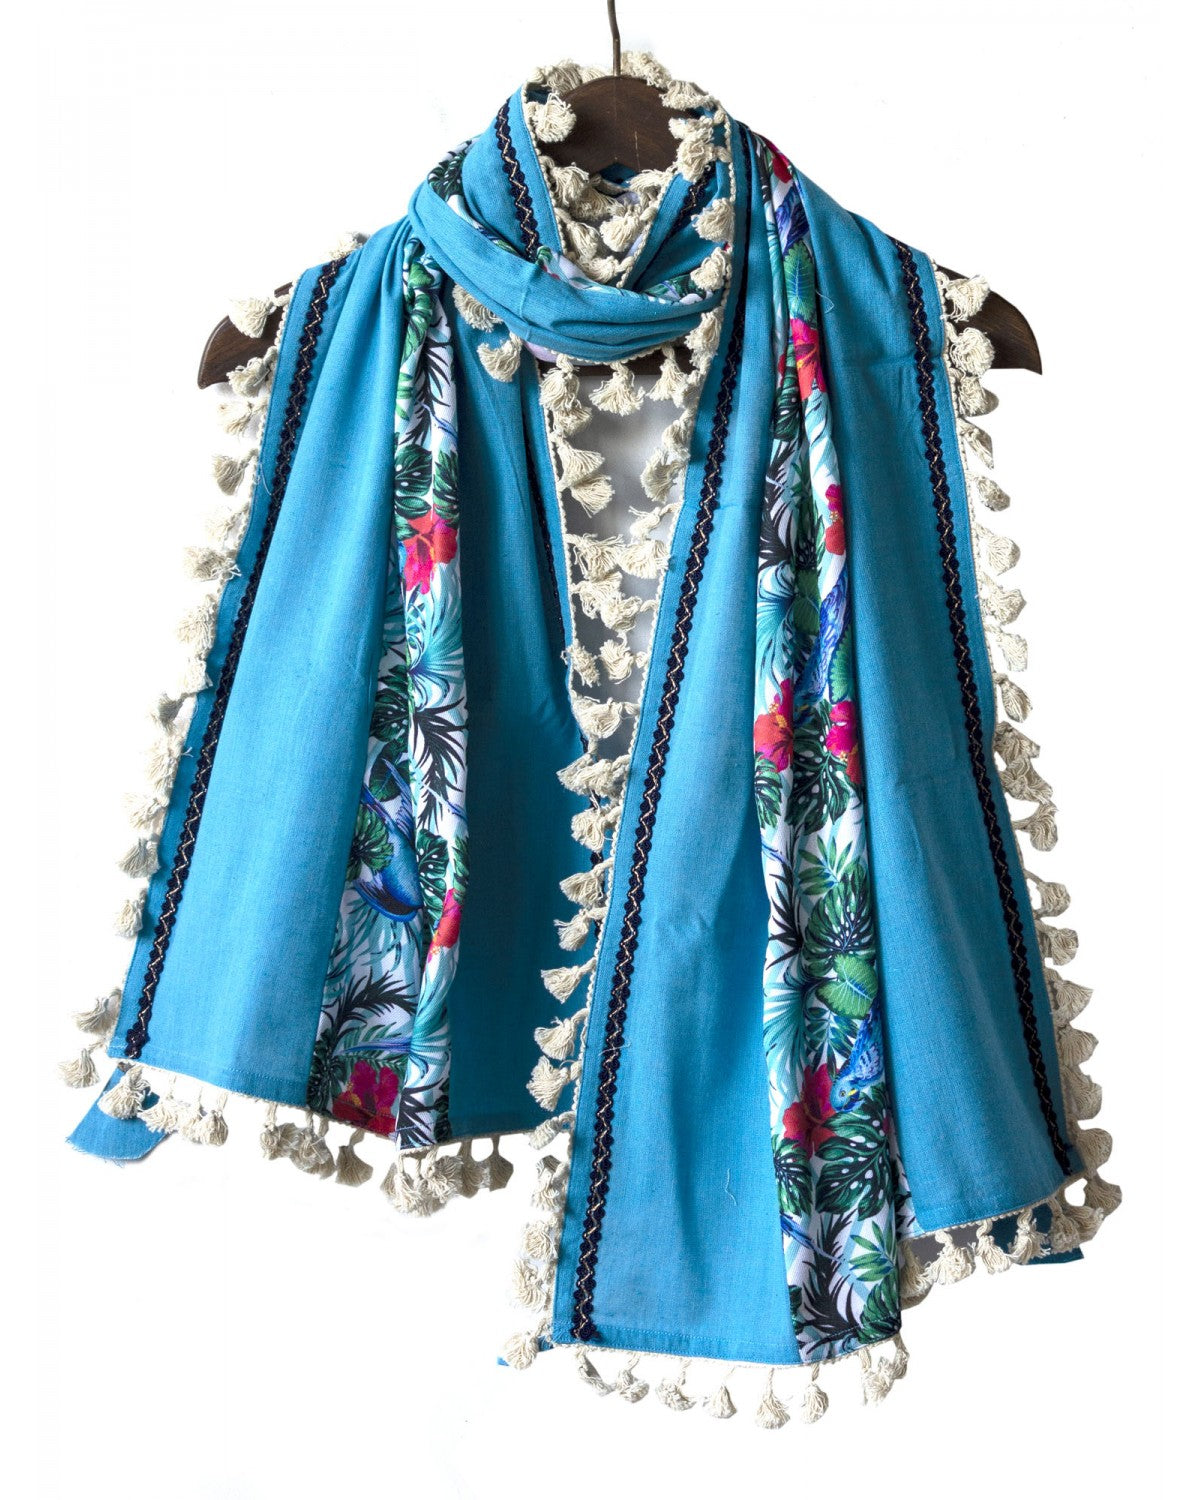 Sky Blue and White Floral Stole/Dupatta with Tassels-MD004